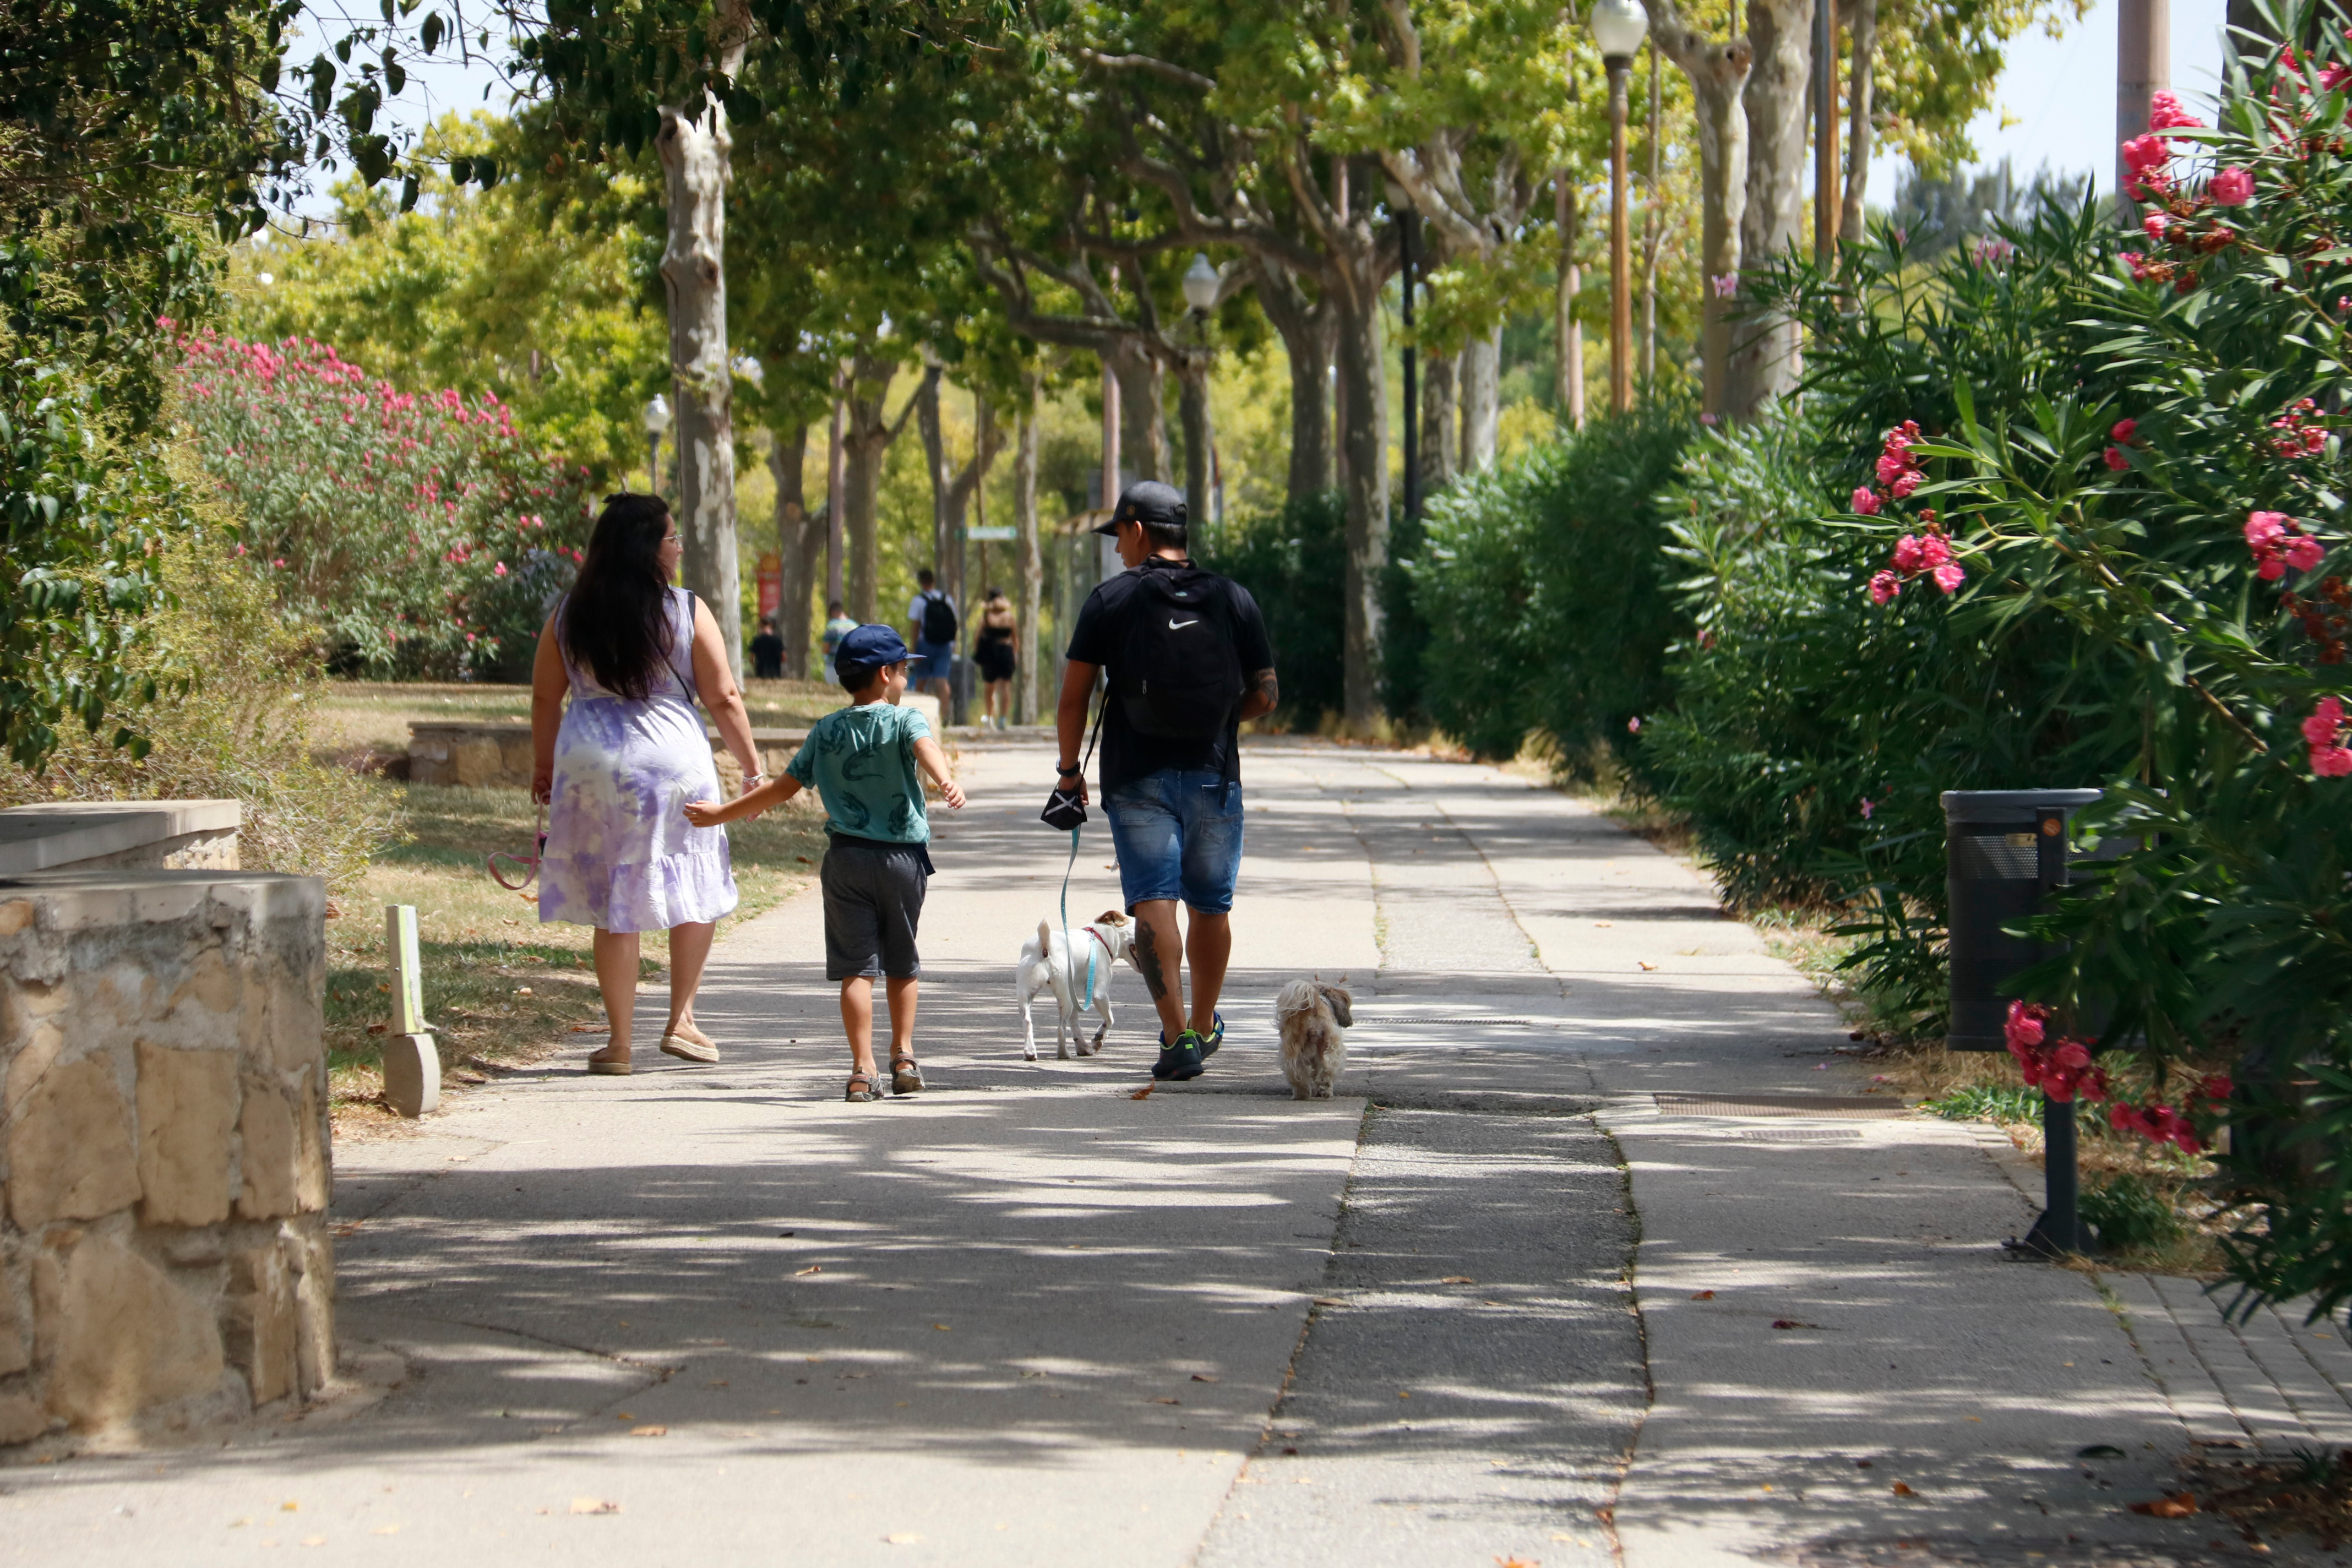 A family walking their dog in Barcelona's Montjuïc mountain on August 12, 2021